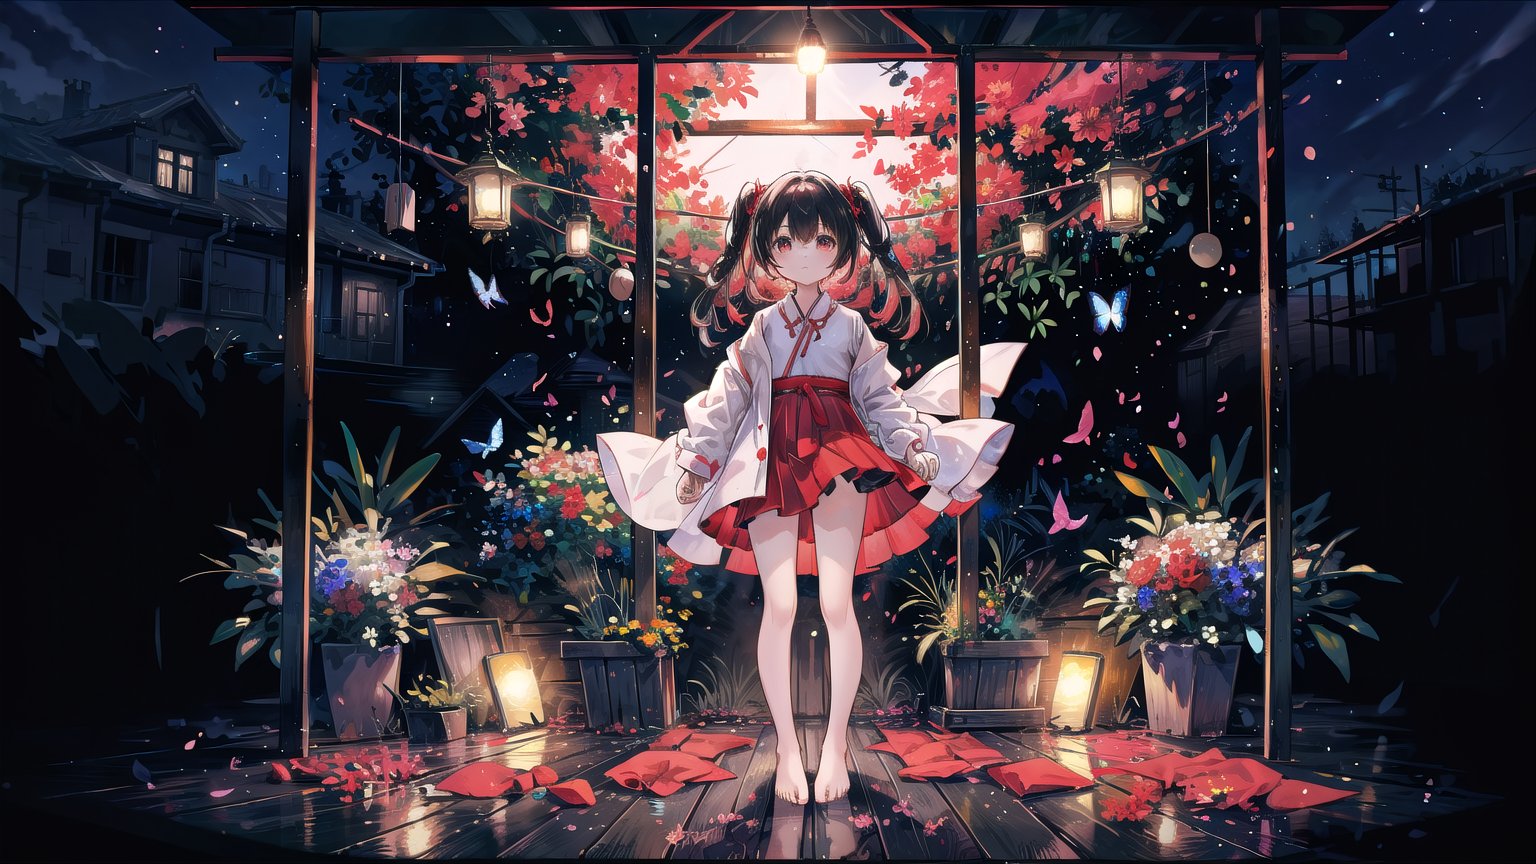 1 girl,HDR,high contrast,red classical robe,flying long hair,short skirt,hair tied with red ribbon,wind chimes,full body,soft clothing texture,eyes looking at the audience,flowers,butterflies,barefoot,red ribbon fluttering in the wind